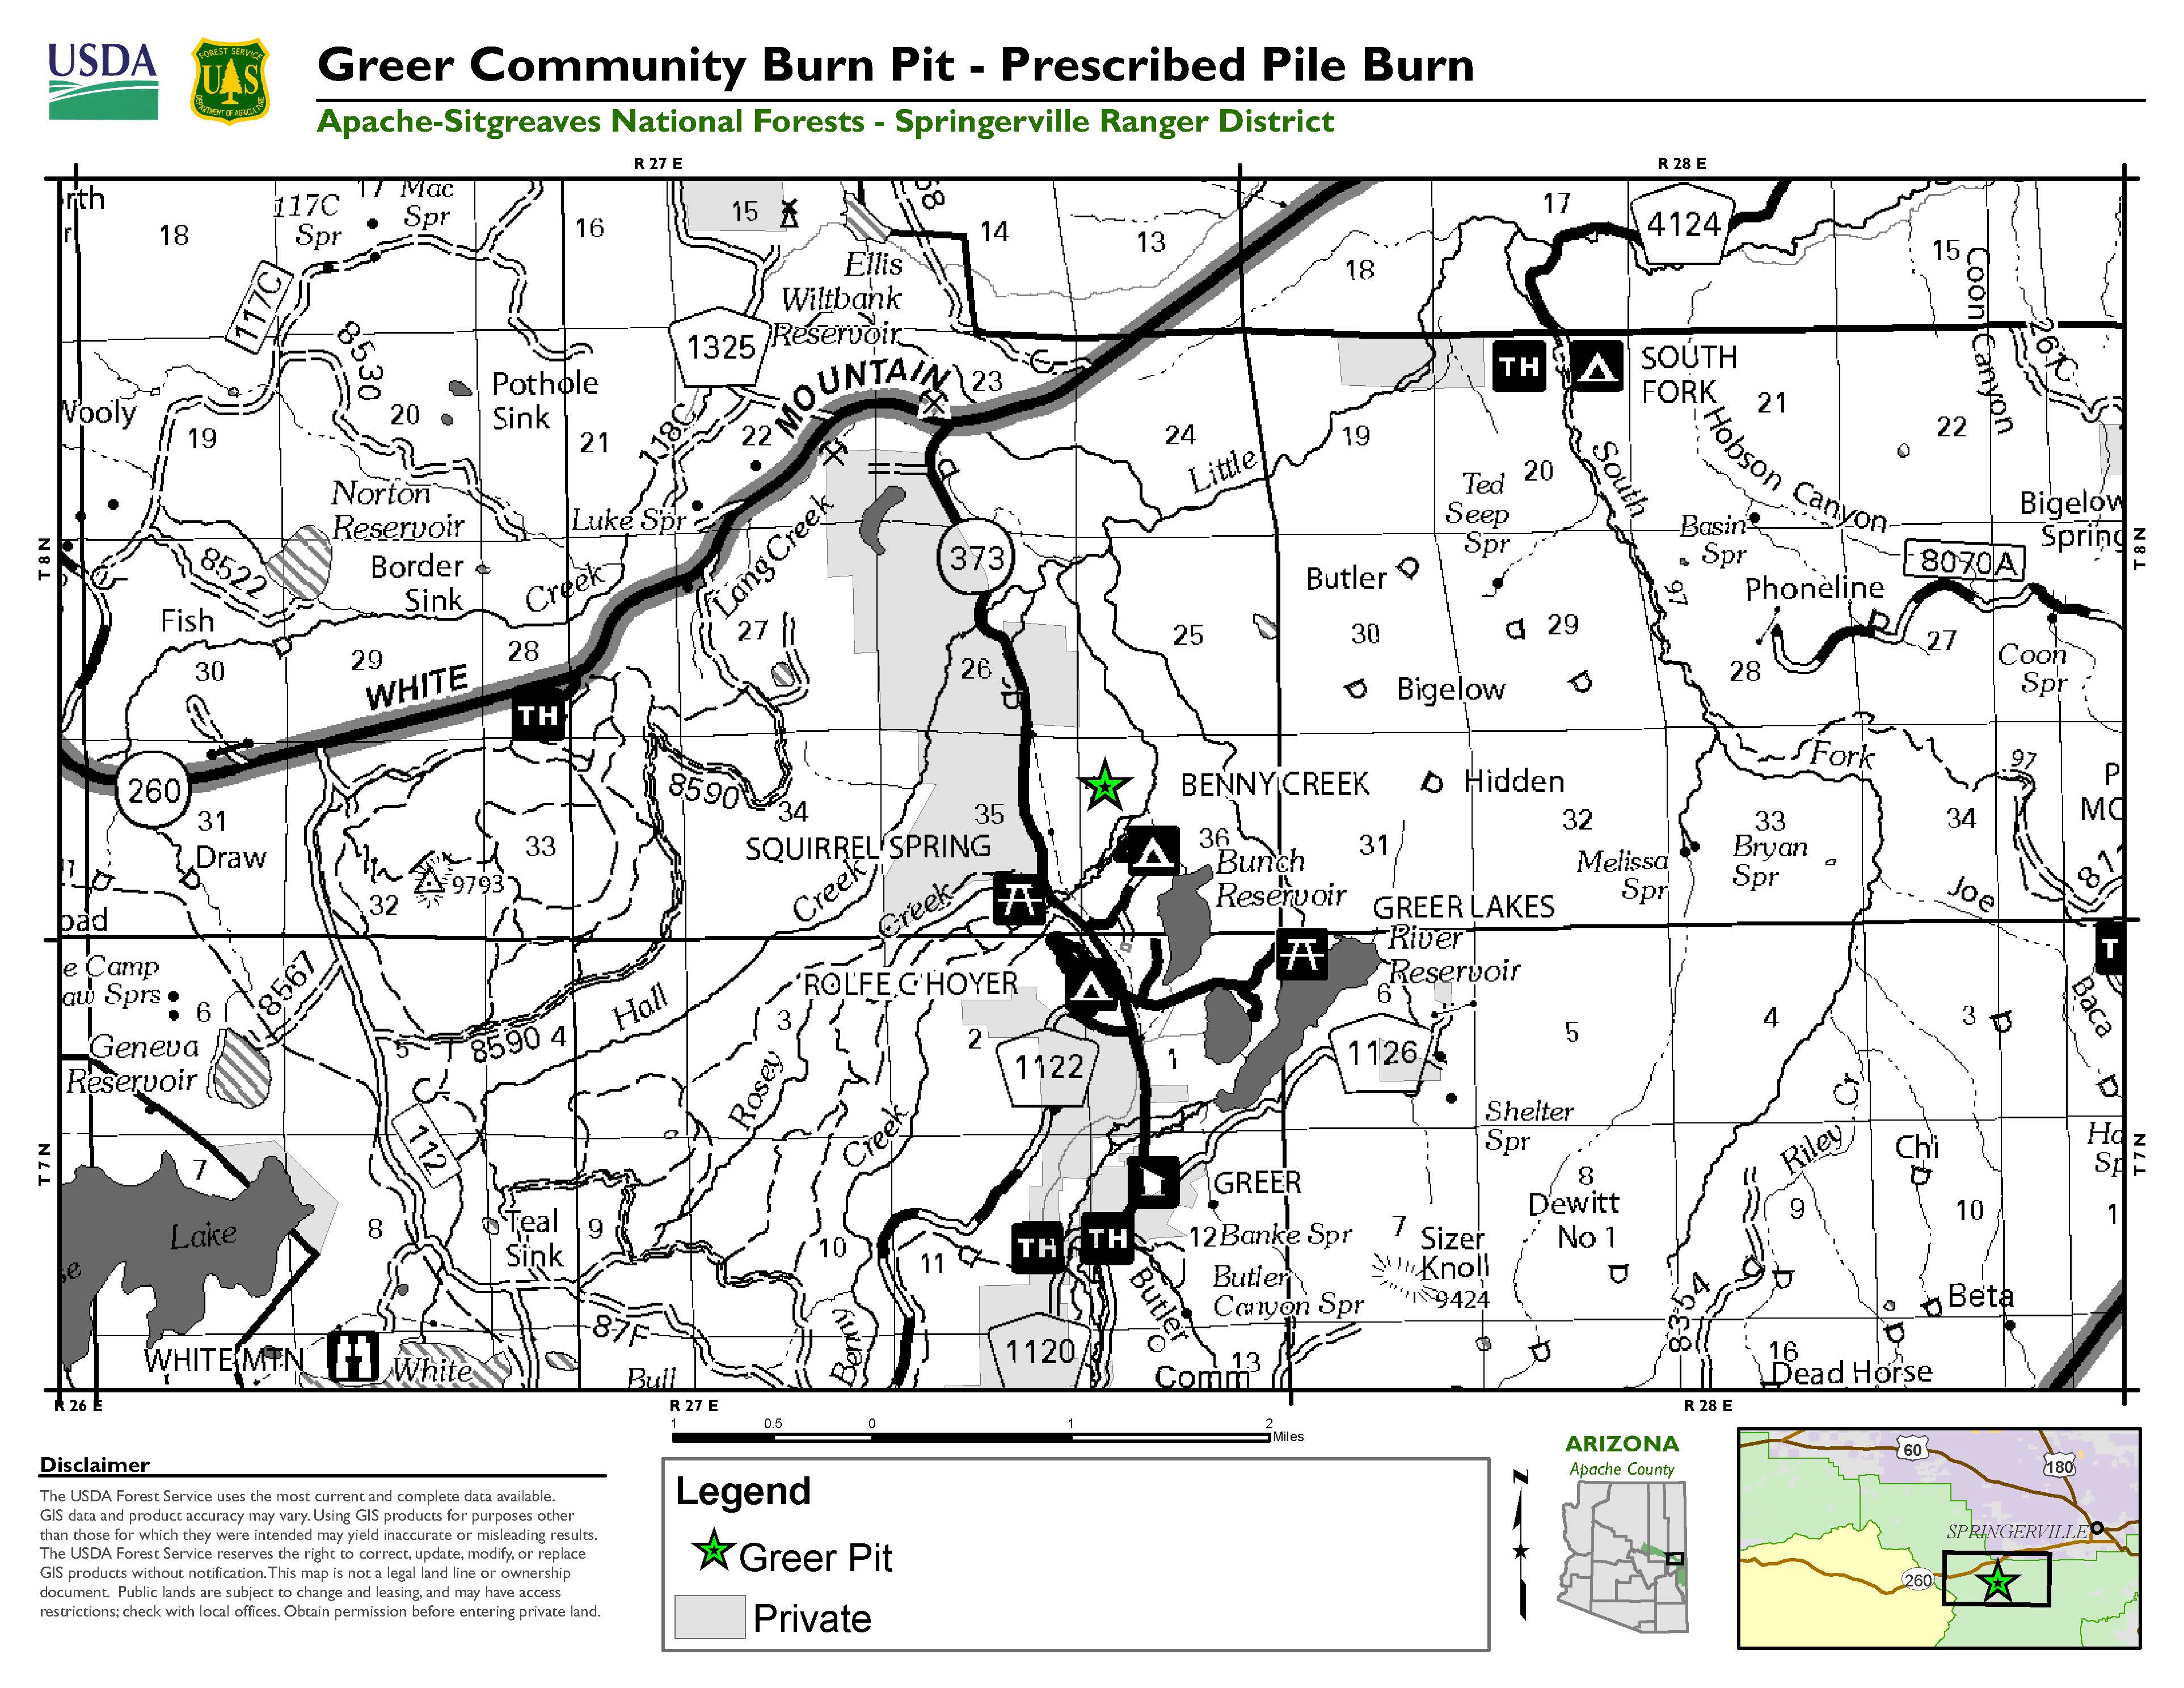 A photo of the Greer Pit prescribed pile burn January 5 2024